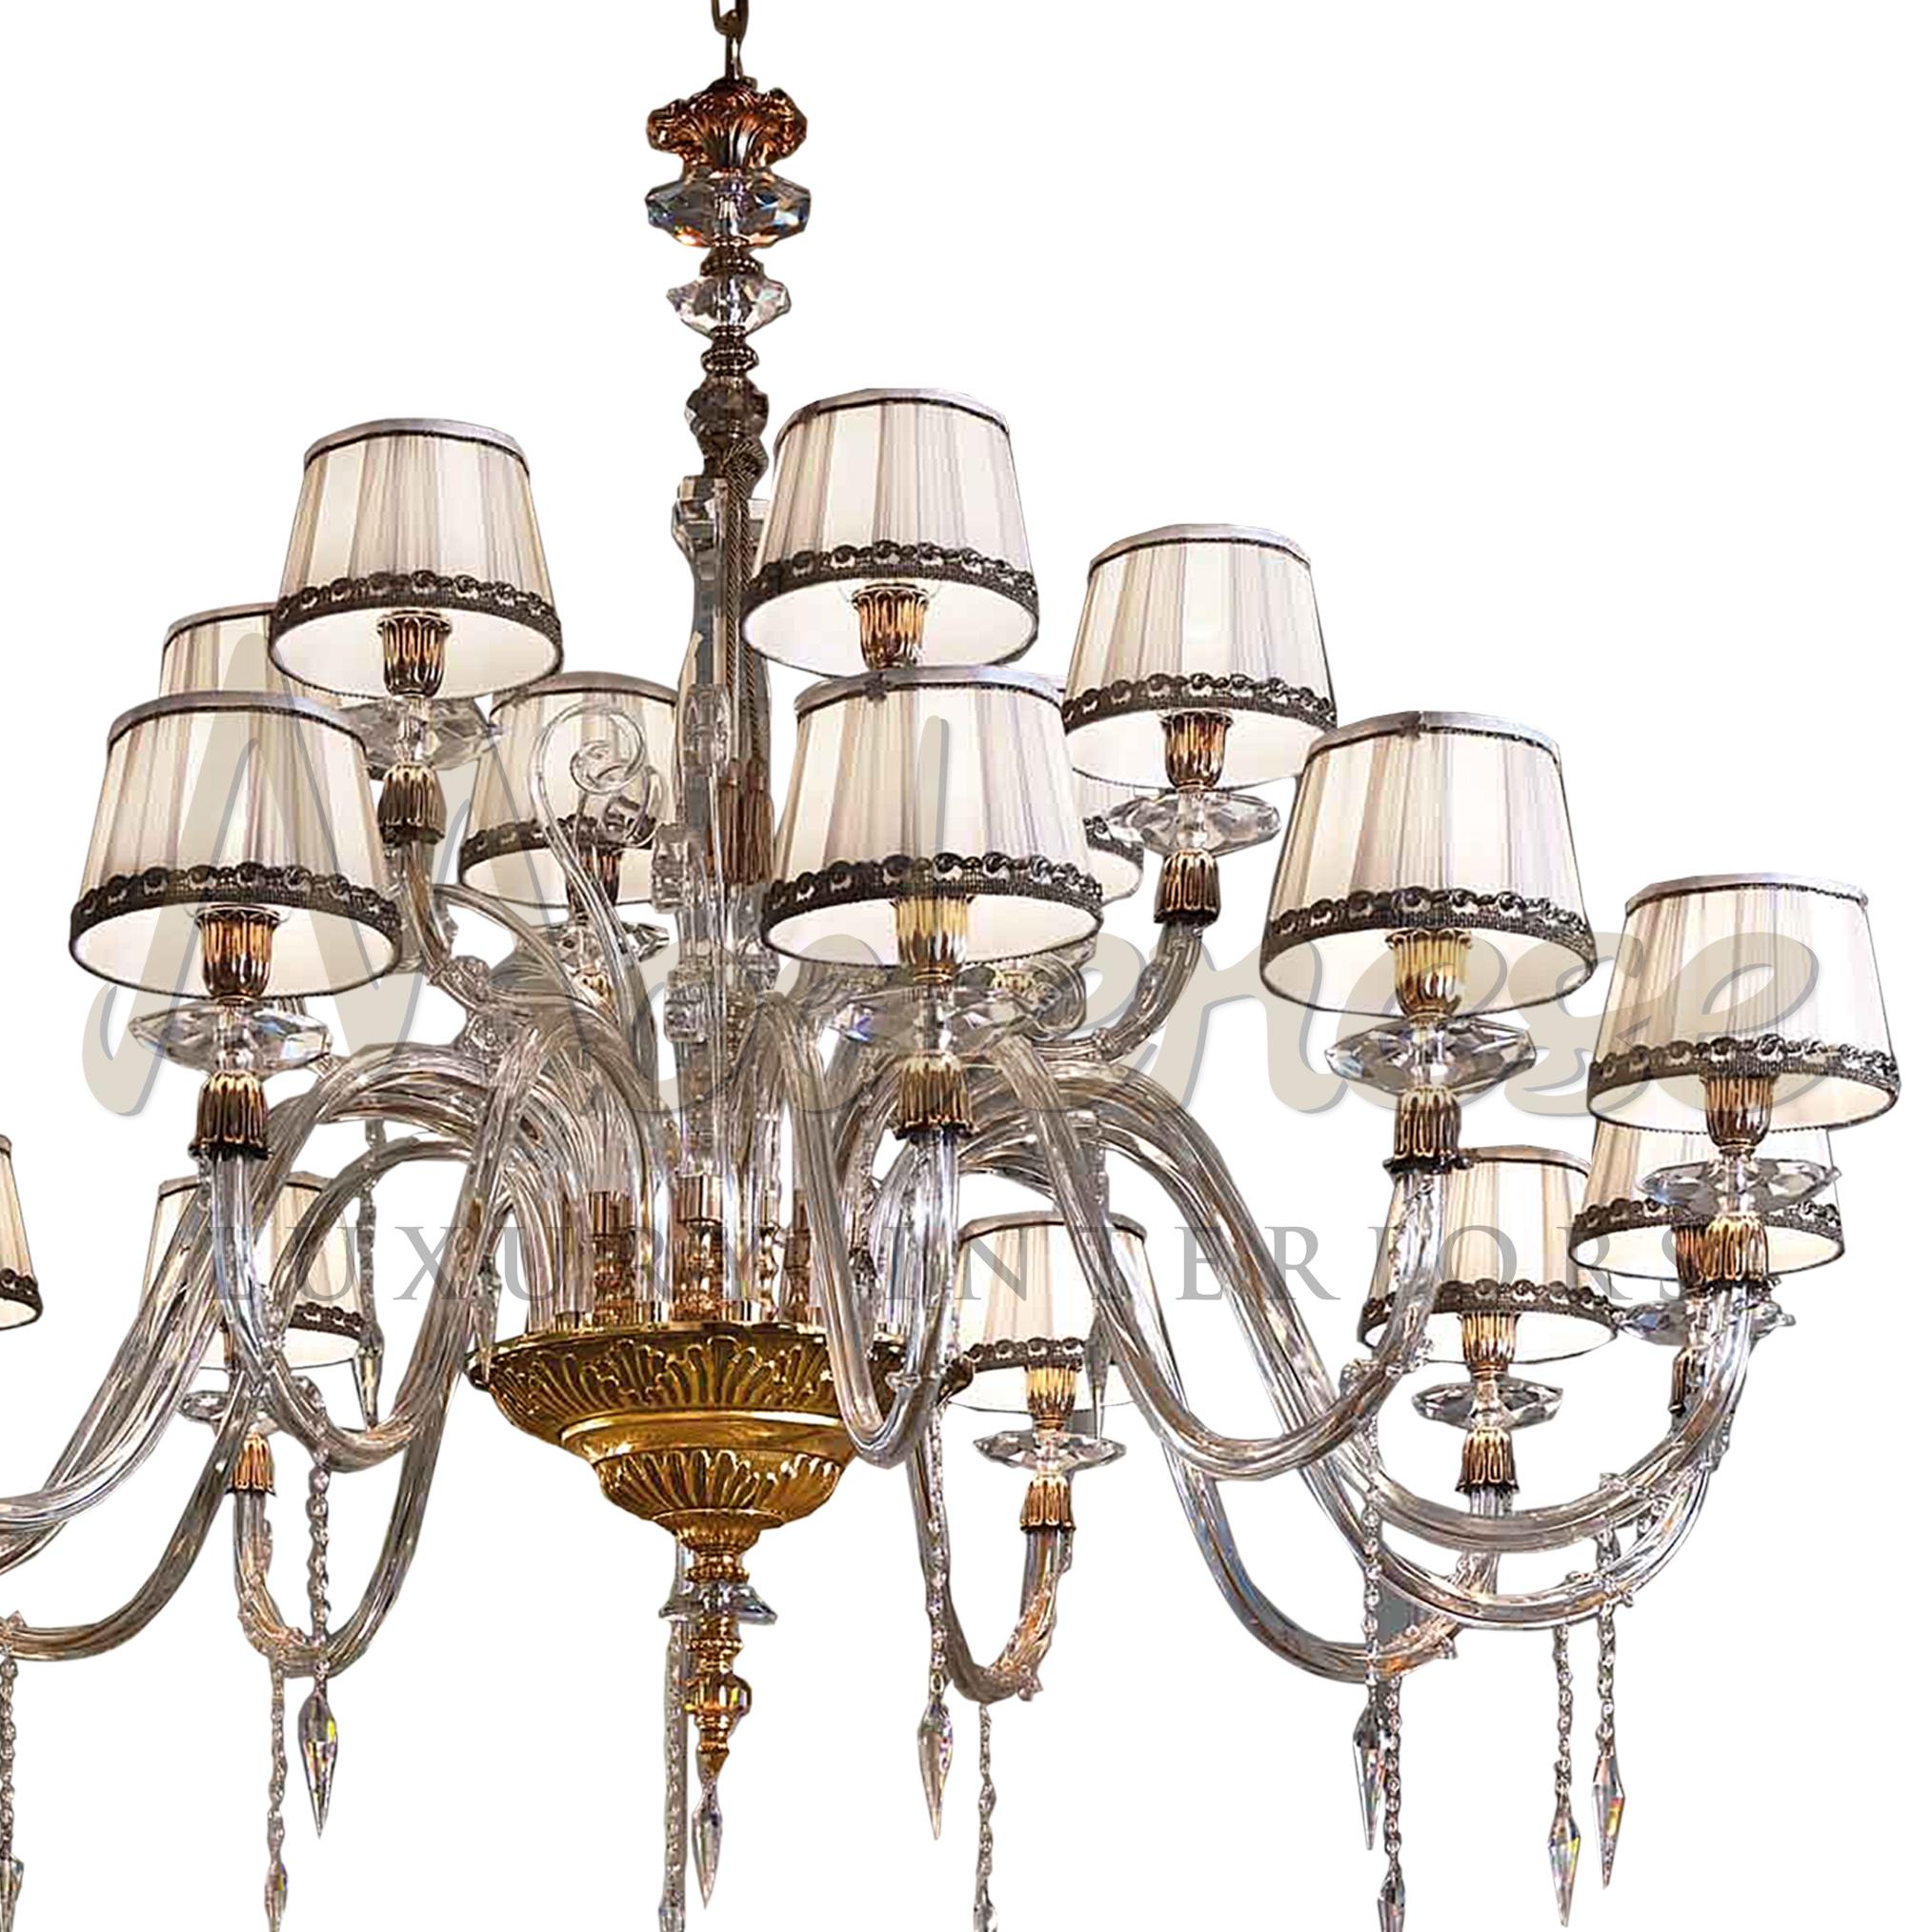 These lamps match luxury, brilliance and grandeur of the royal palaces and, at the same time, sophistication and elegance. Combining french gold metal and transparent crystals with amber details all in one palatableness chandelier. This model